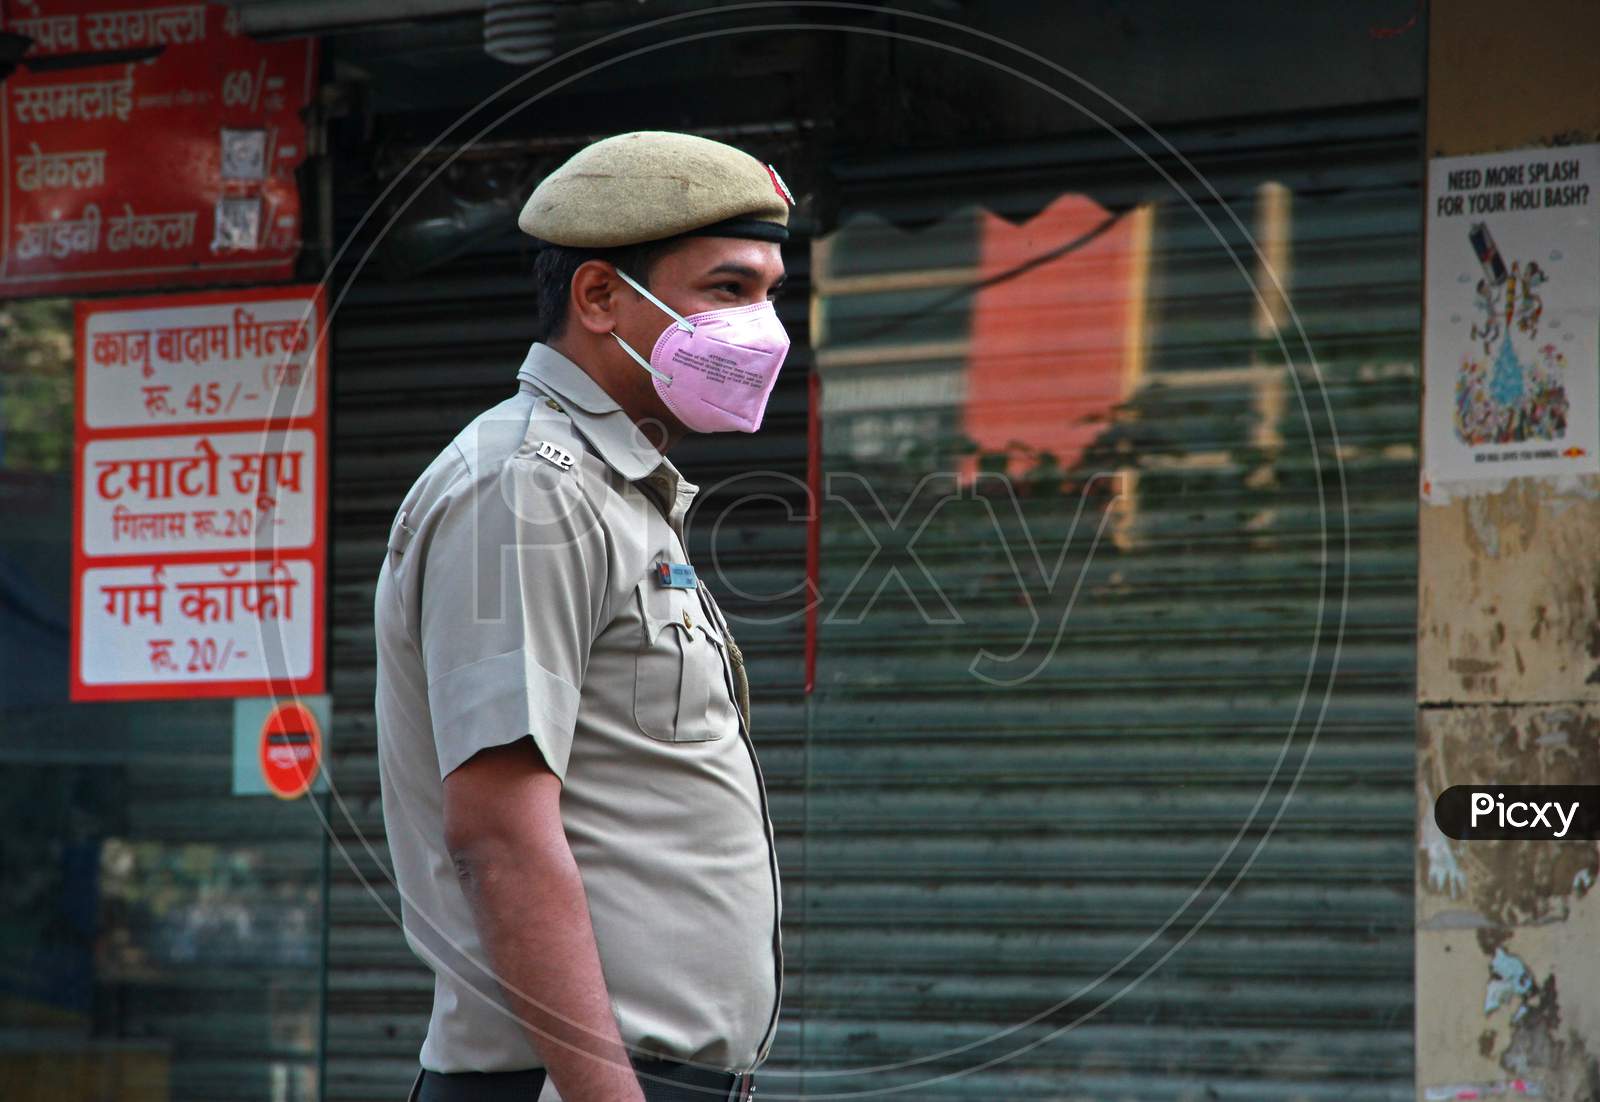 A Police Man Wearing a Safety N95 Mask  On Streets Of Delhi Amidst COVID 19 or Corona Virus Outbreak